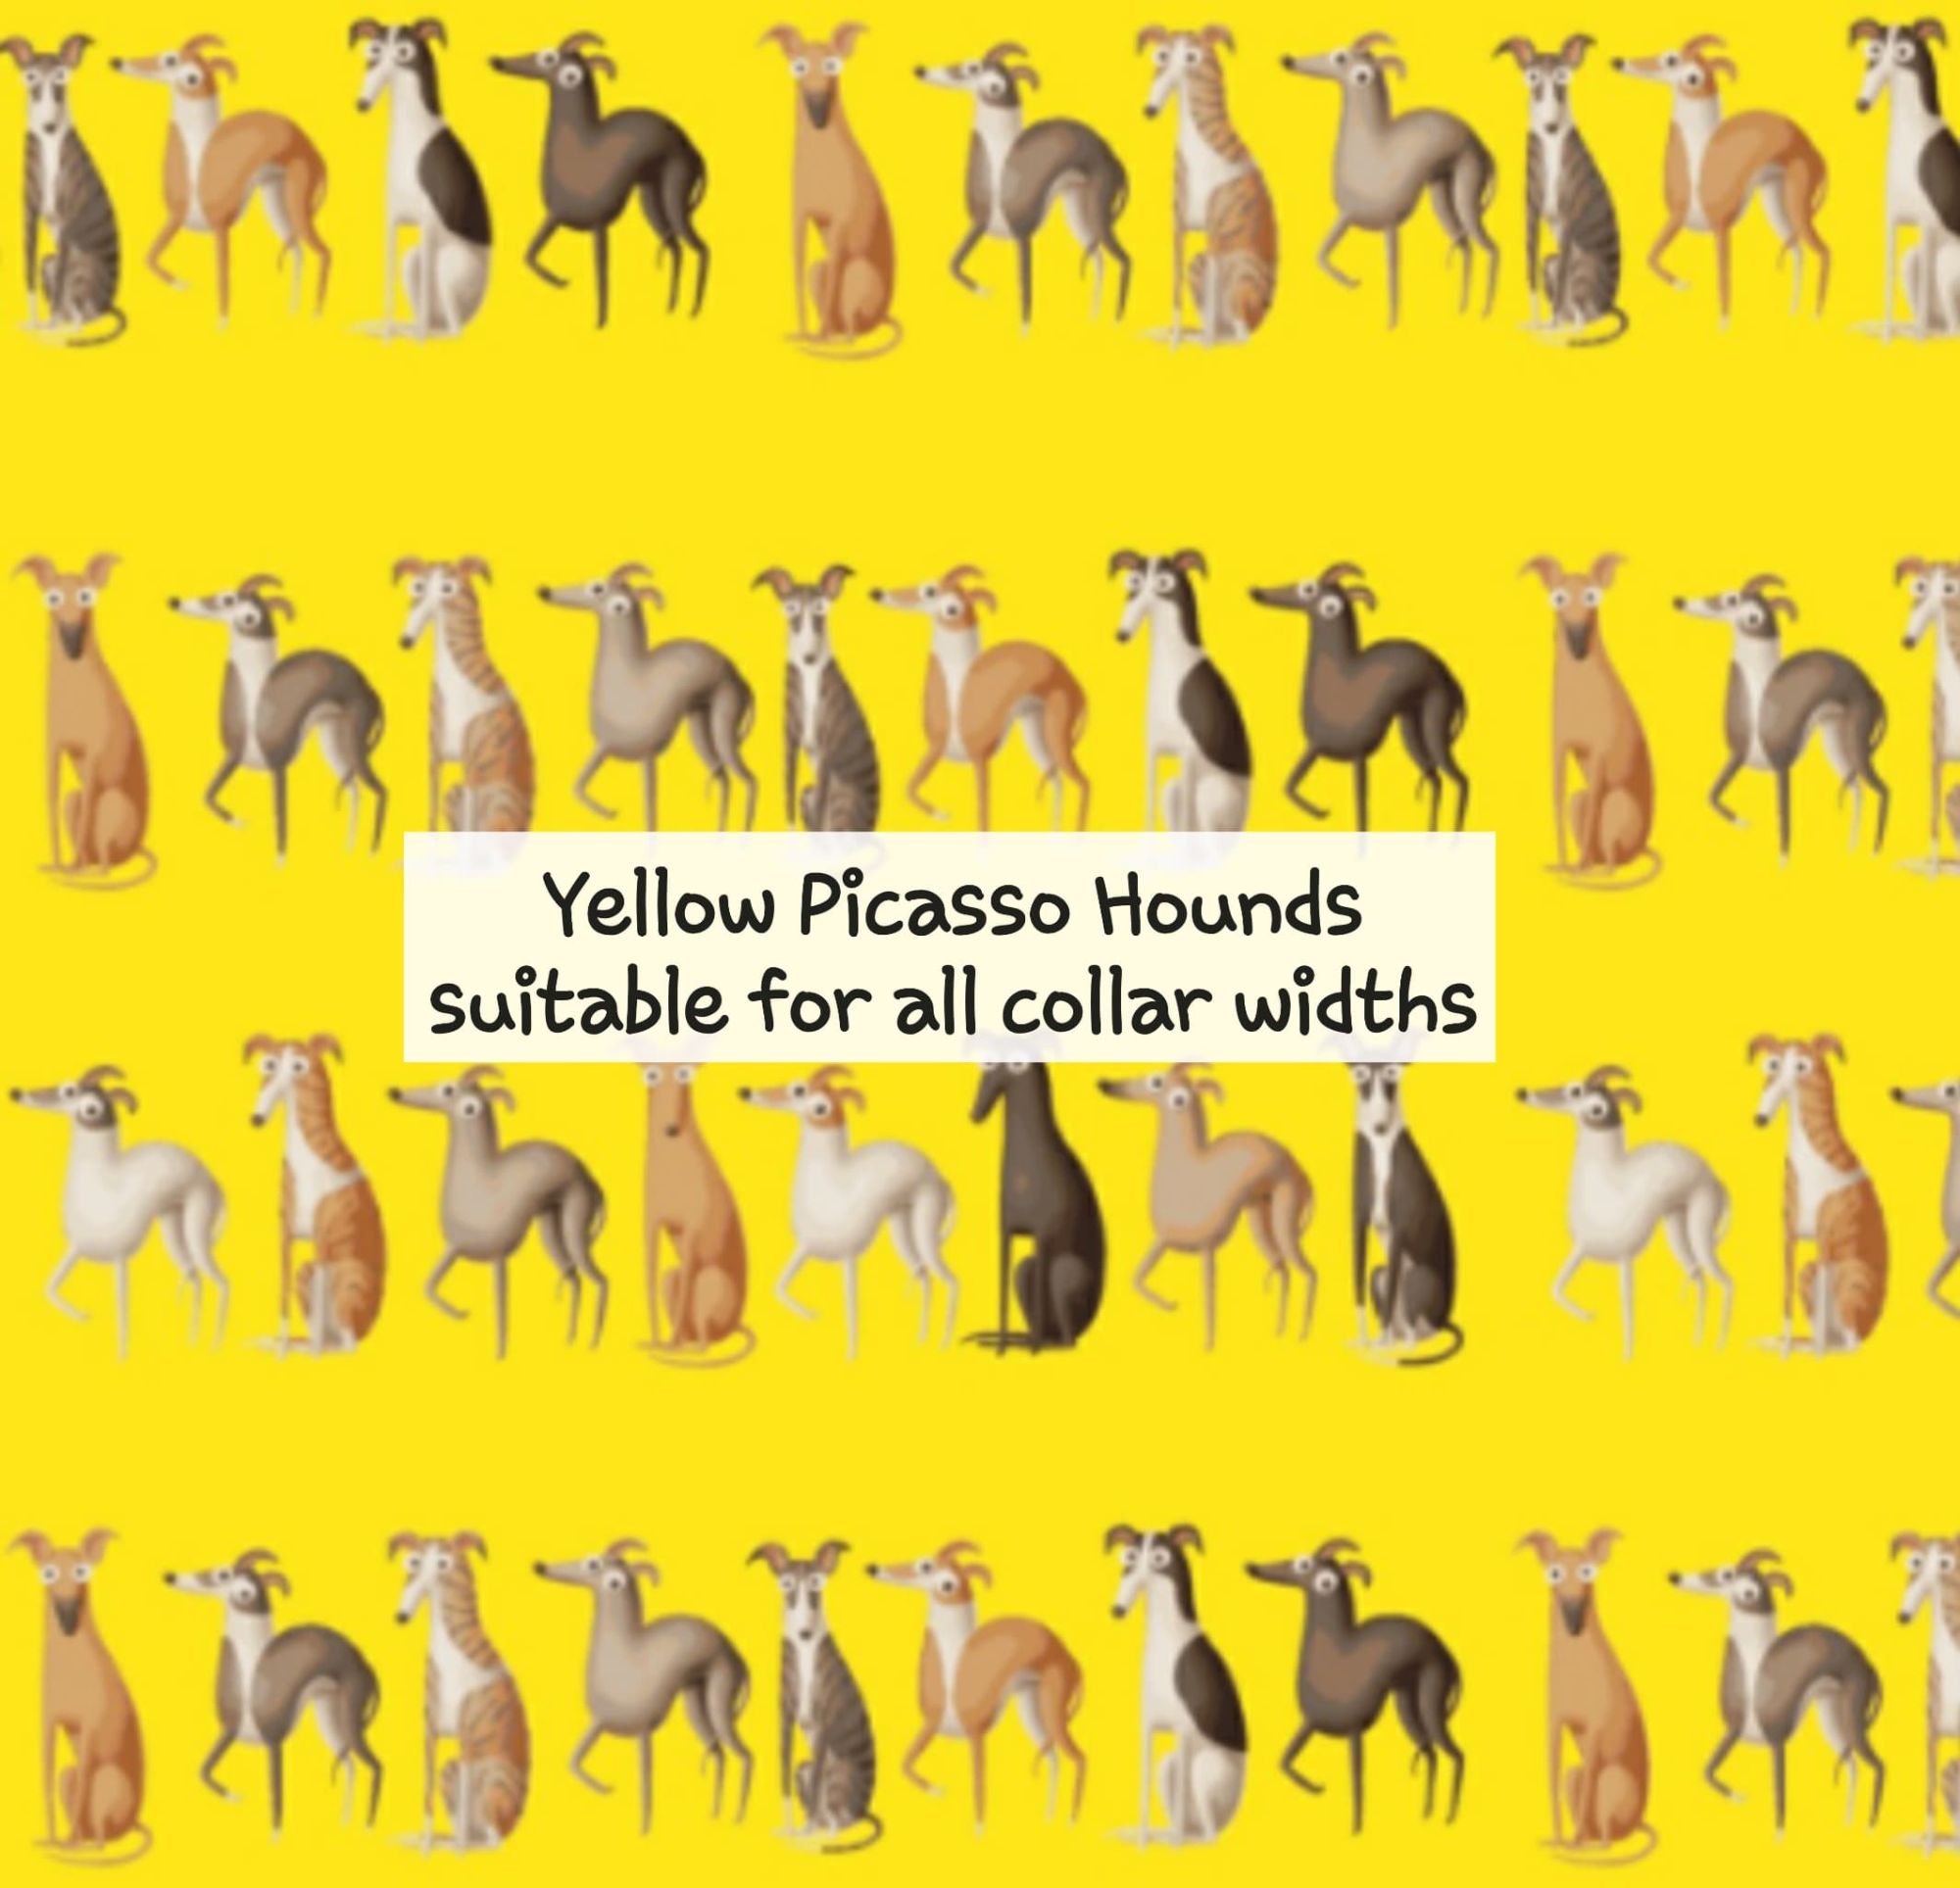 Yellow Picasso Hounds - Suitable for all collar widths